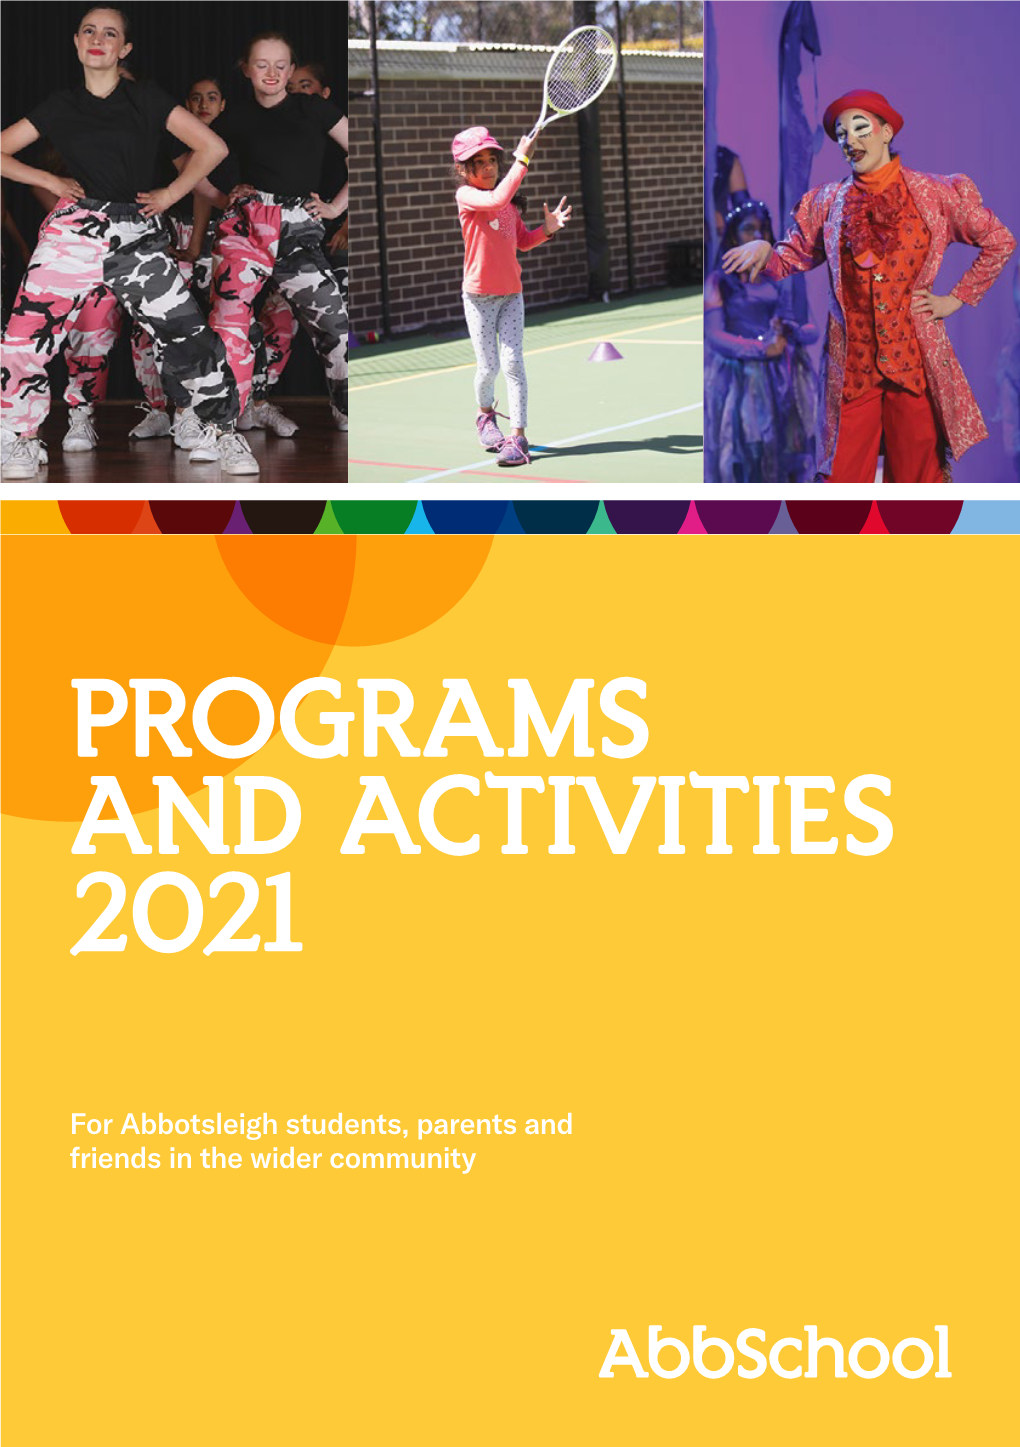 Programs and Activities 2021